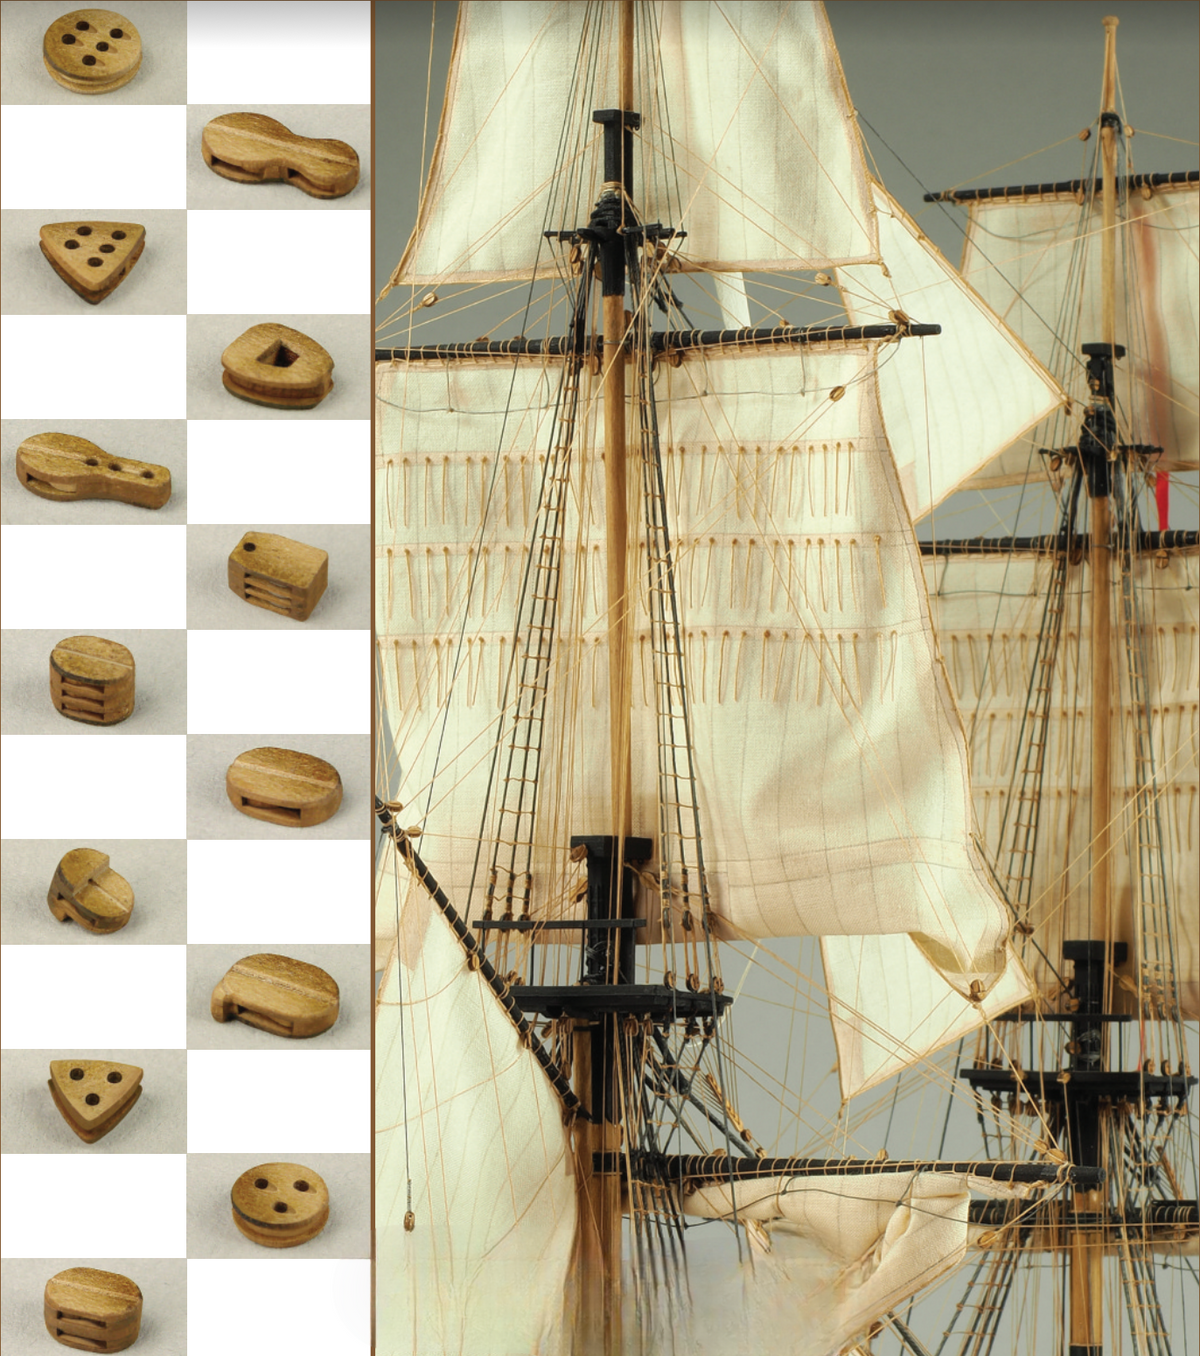 Image of Shipyard's Card Fitting Blocks, featuring small, detailed blocks for model ship assembly, perfect for adding intricate rigging details to scale models.